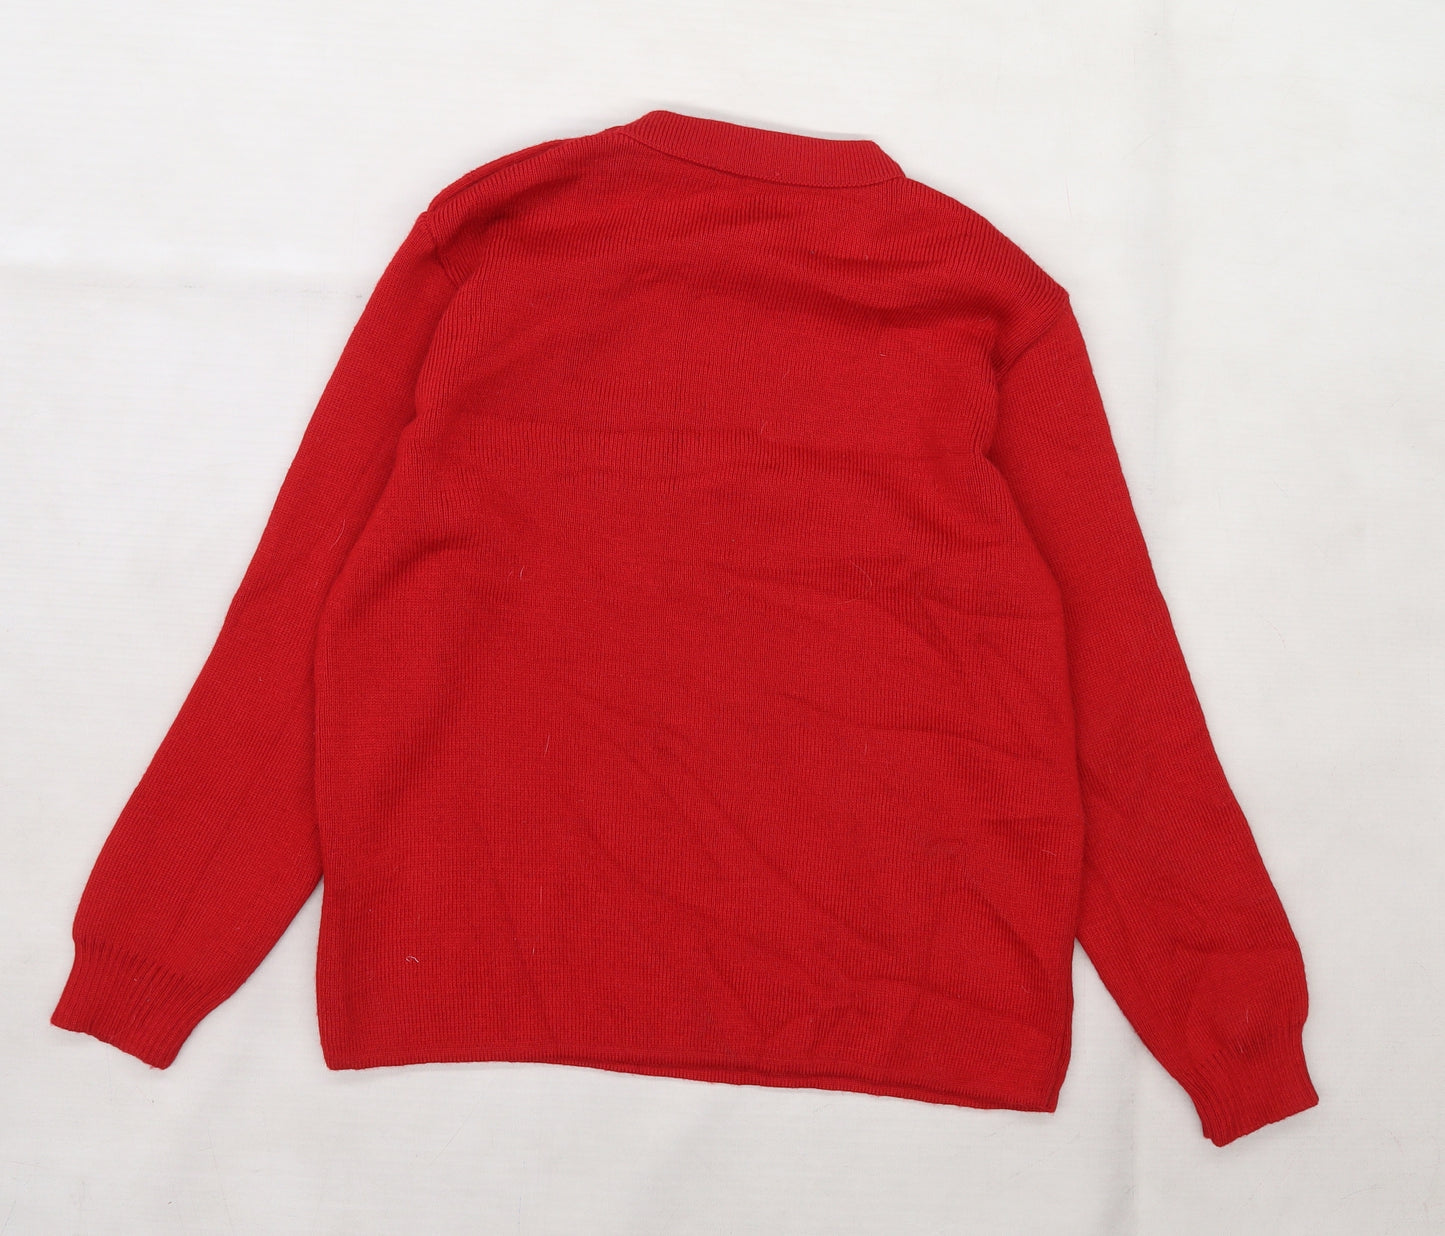 Armor Kids Boys Red  Knit Pullover Jumper Size M